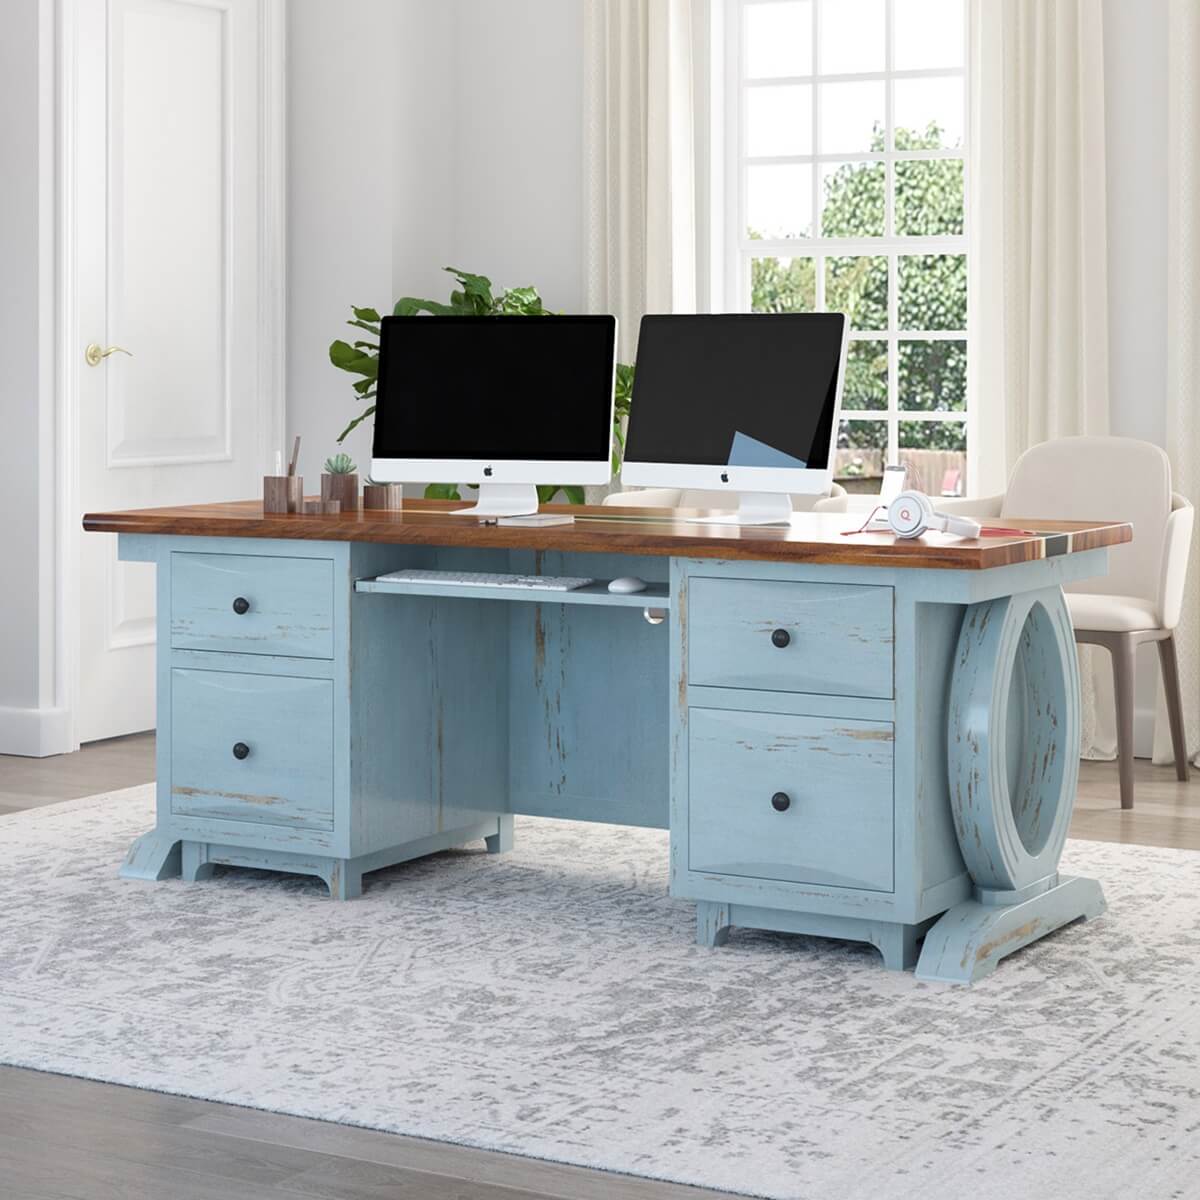 https://www.sierralivingconcepts.com/images/thumbs/0404925_eden-two-tone-77-inch-blue-solid-wood-home-office-executive-desk.jpeg